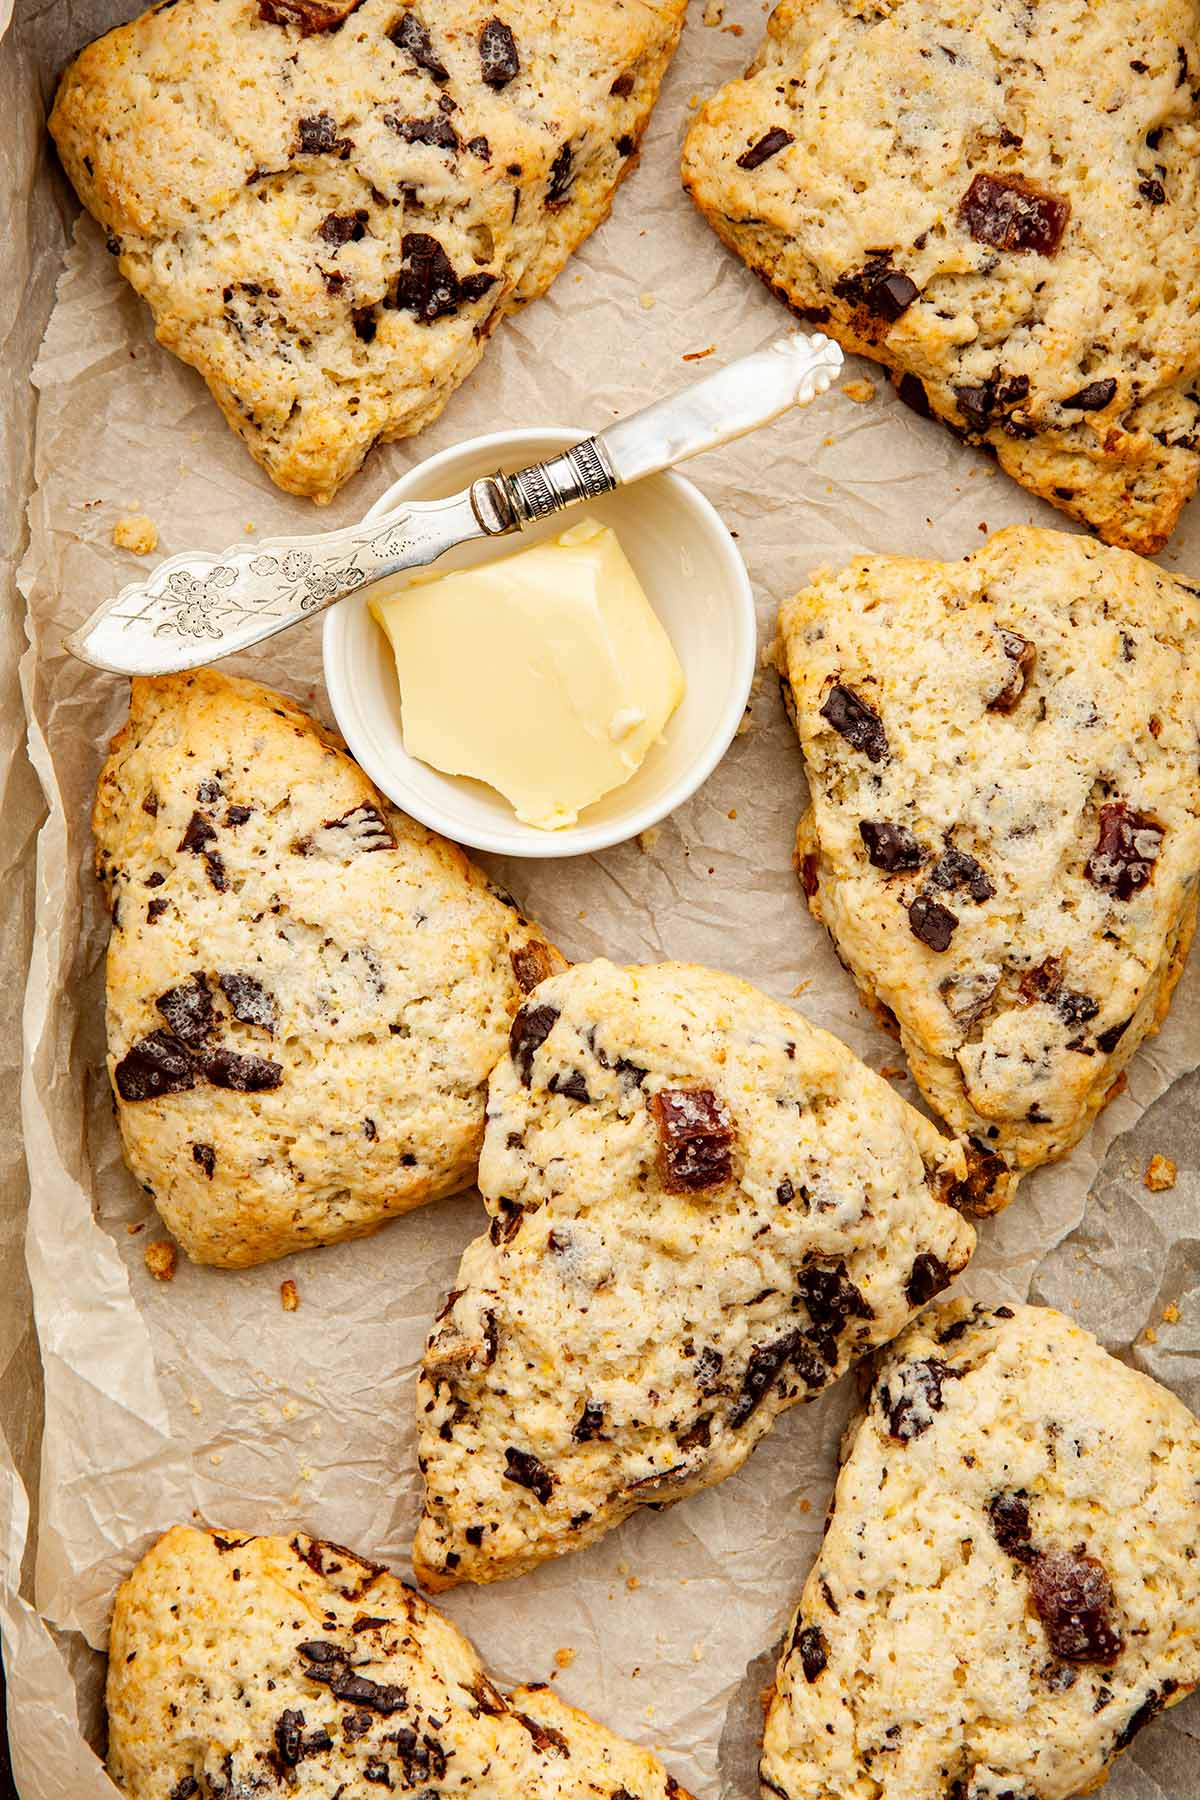 Date and orange scones piled ina. box lined with parchment paper with a small dish of butter and a tiny pearl-handled knife.